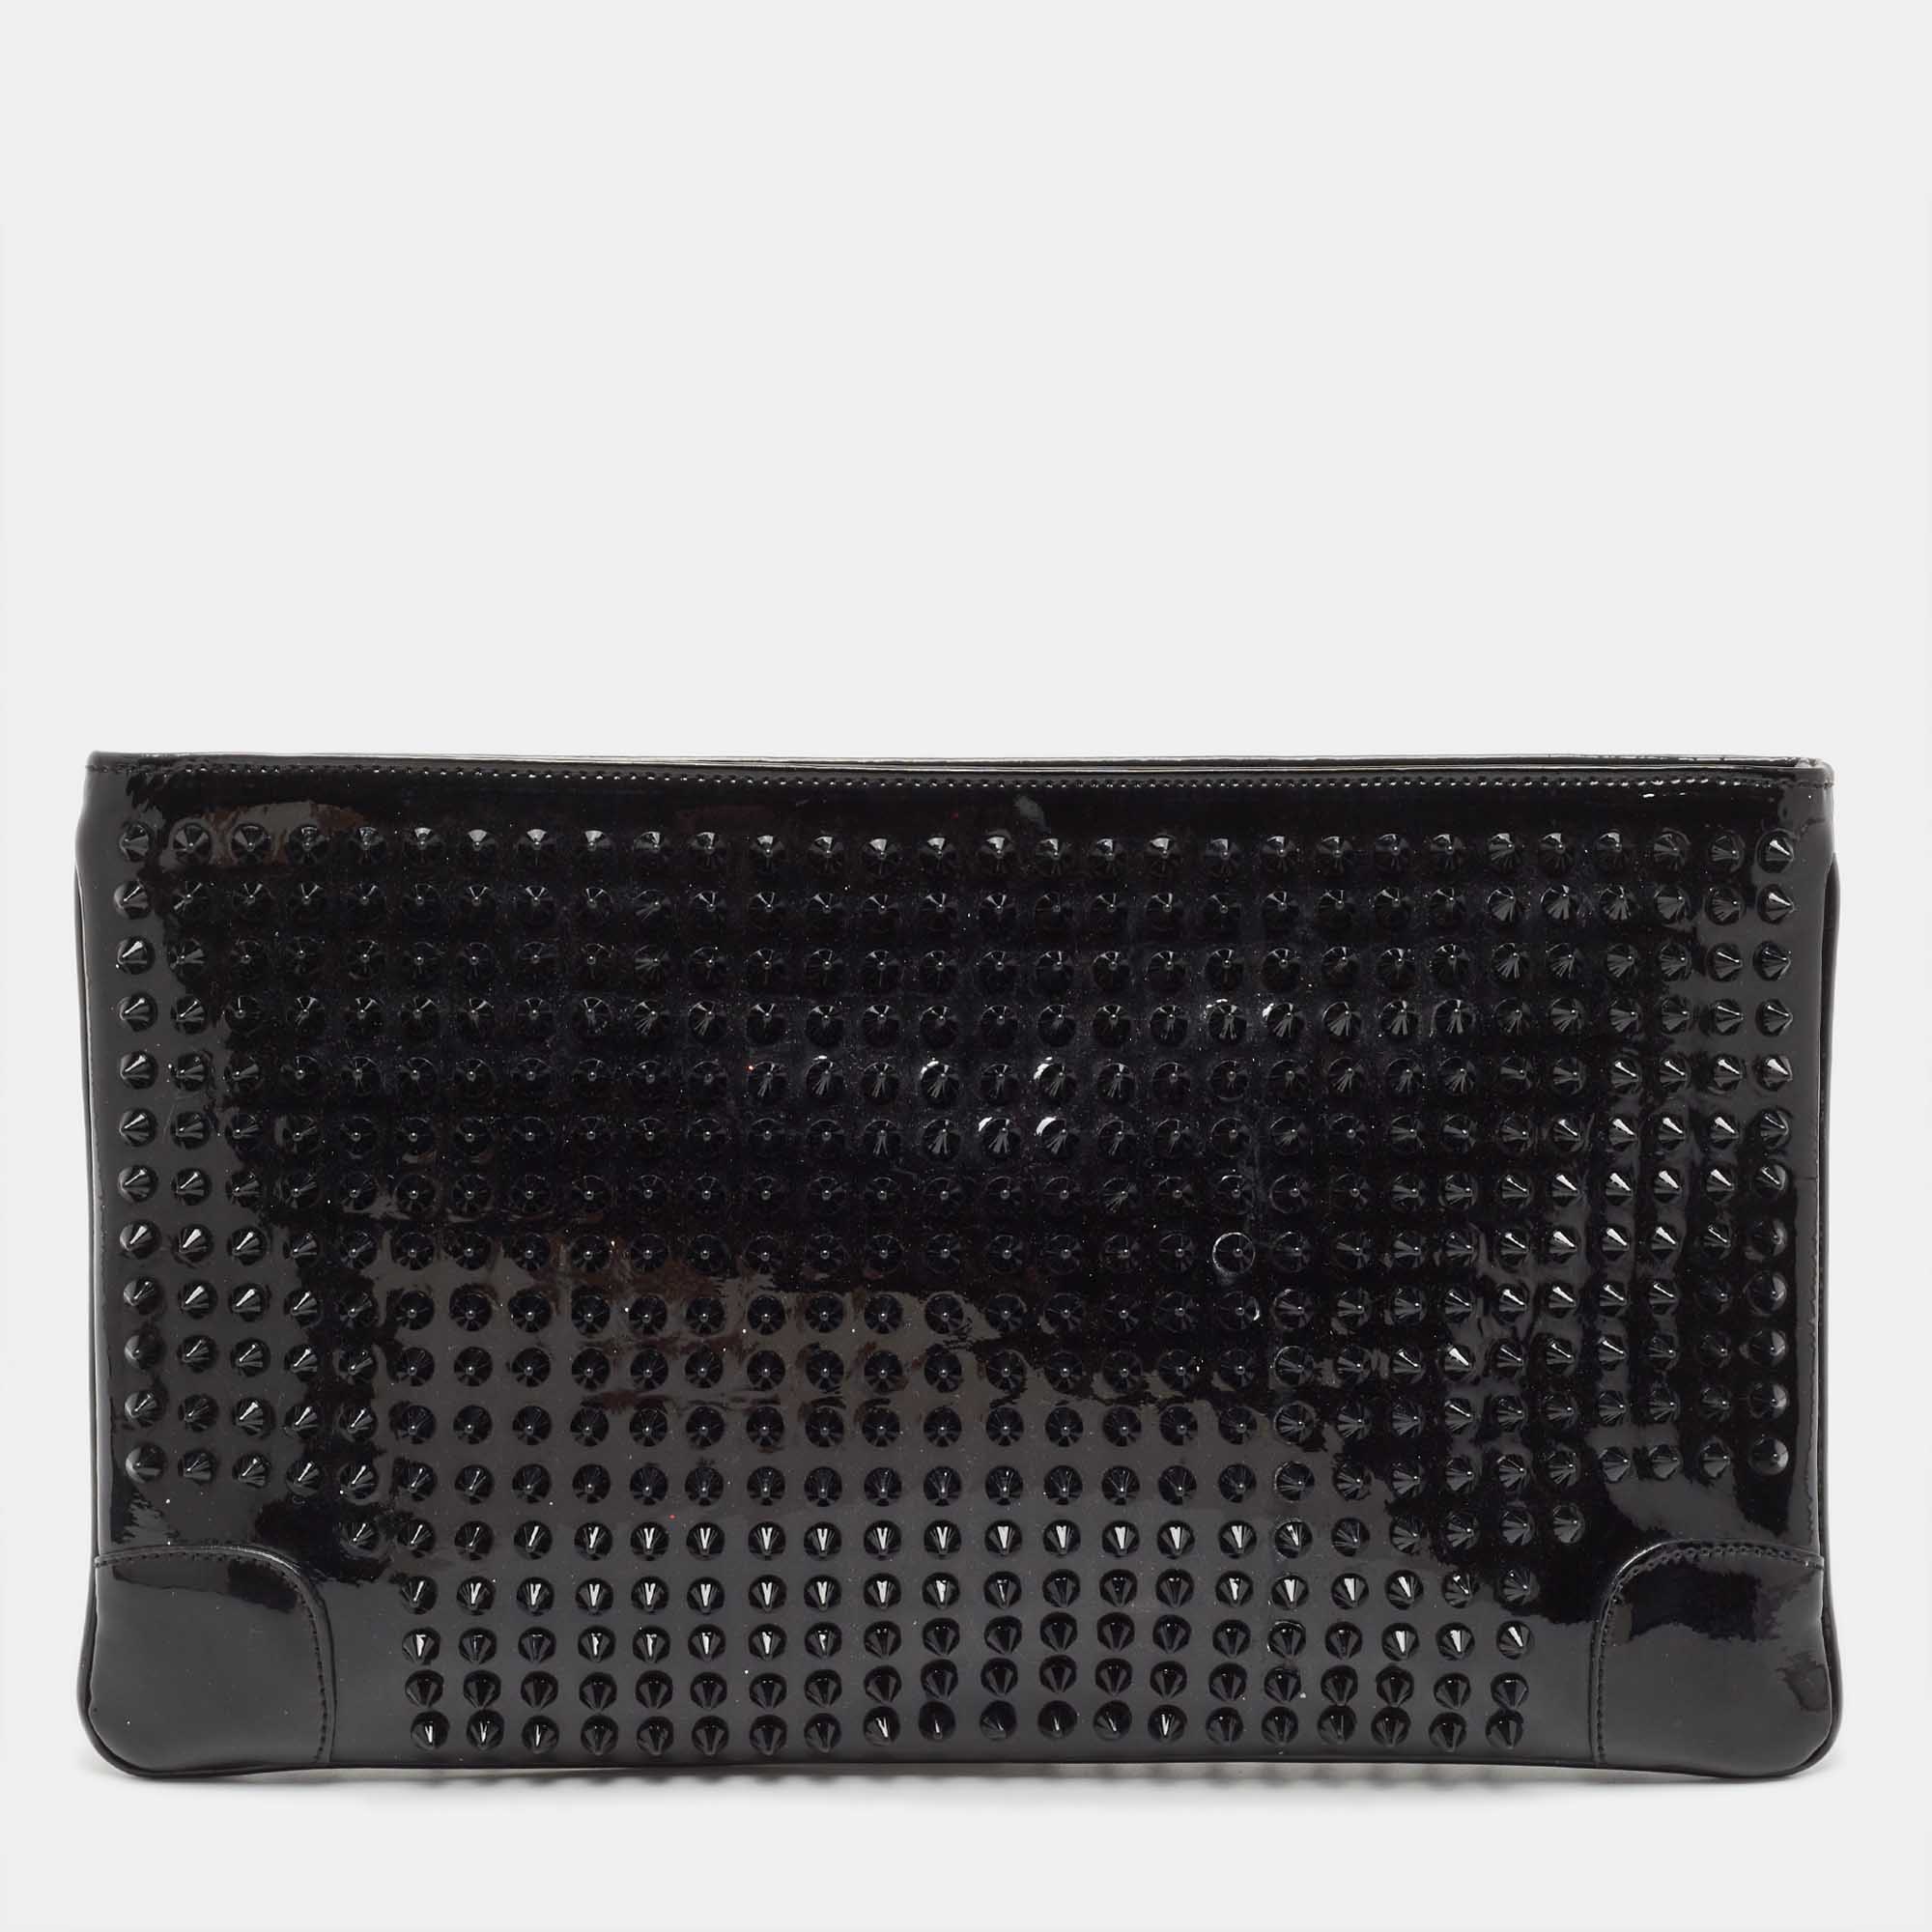 Pre-owned Christian Louboutin Black Patent Leather Loubiposh Spike Clutch